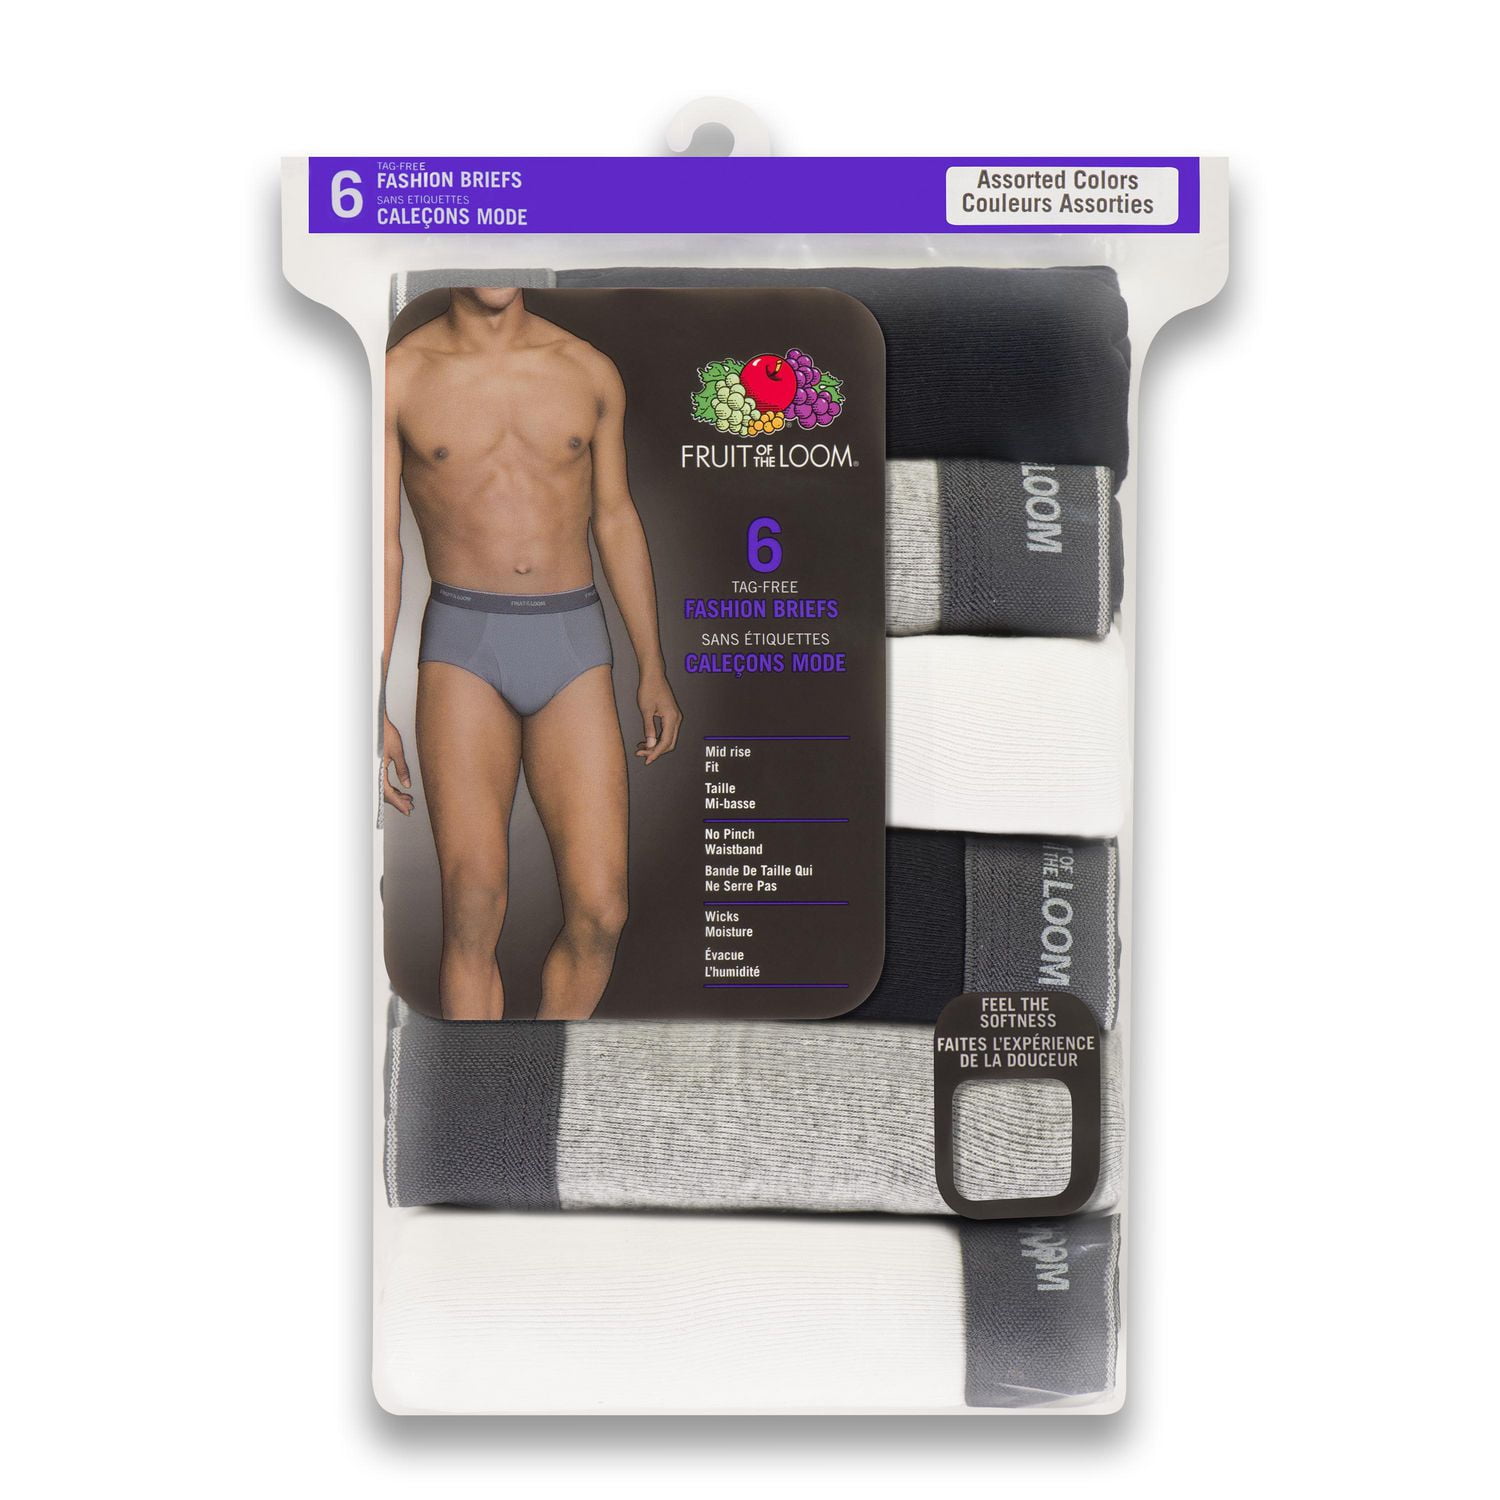 Fruit of the Loom Men's Brief, 6-pack, Sizes S-XL 